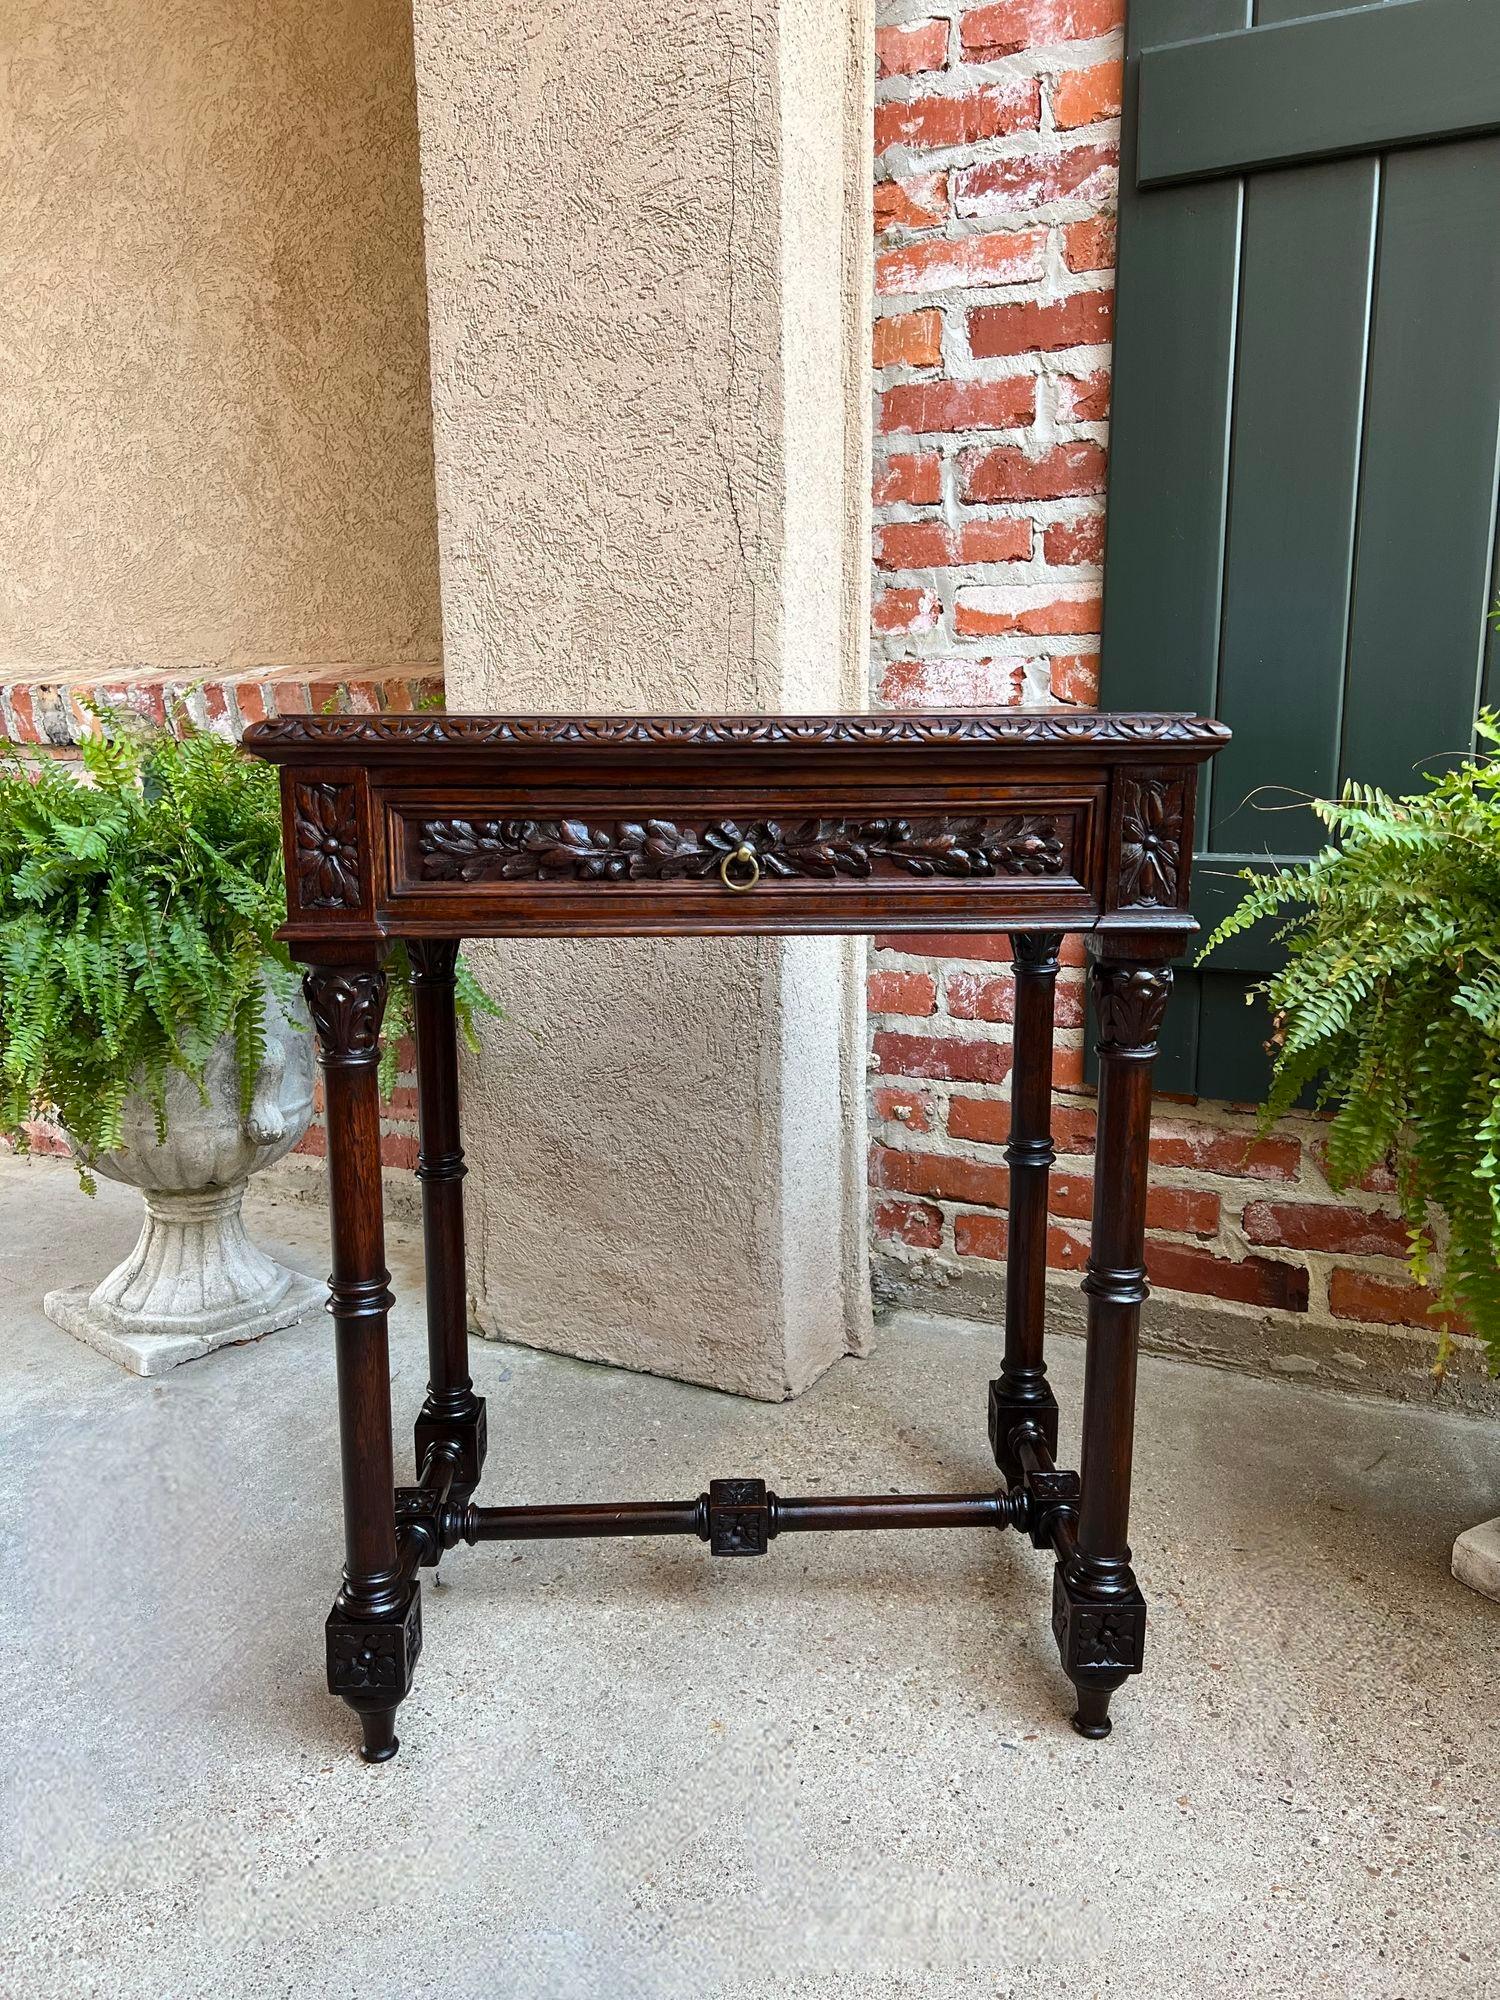 Antique French Side Sofa Hall Table Carved Dark Oak Renaissance End Table.

Direct from France, a very highly carved and elegant antique French hall table in a perfect small size for anywhere from your foyer to sofa to bedside!
The opulent carvings